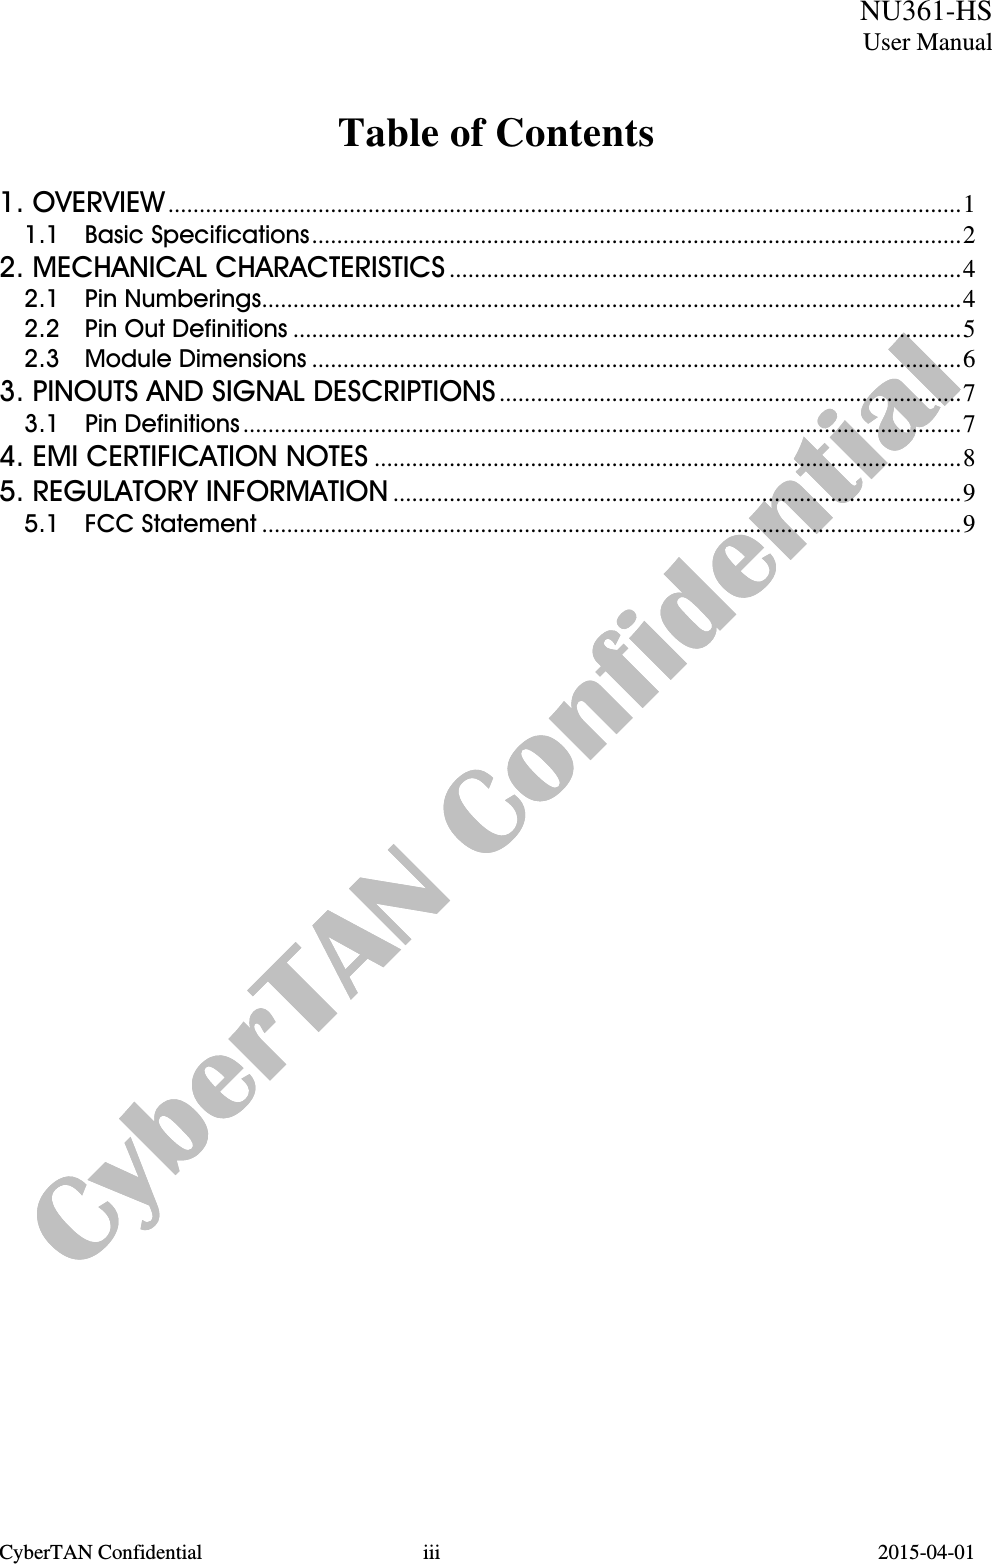  CyberTAN Confidential  iii                                          2015-04-01  NU361-HSUser ManualTable of Contents   1. OVERVIEW...............................................................................................................................1 1.1  Basic Specifications........................................................................................................2 2. MECHANICAL CHARACTERISTICS ..................................................................................4 2.1  Pin Numberings................................................................................................................4 2.2  Pin Out Definitions ...........................................................................................................5 2.3  Module Dimensions ........................................................................................................6 3. PINOUTS AND SIGNAL DESCRIPTIONS ..........................................................................7 3.1  Pin Definitions...................................................................................................................7 4. EMI CERTIFICATION NOTES ..............................................................................................8 5. REGULATORY INFORMATION ...........................................................................................9 5.1  FCC Statement ................................................................................................................9       